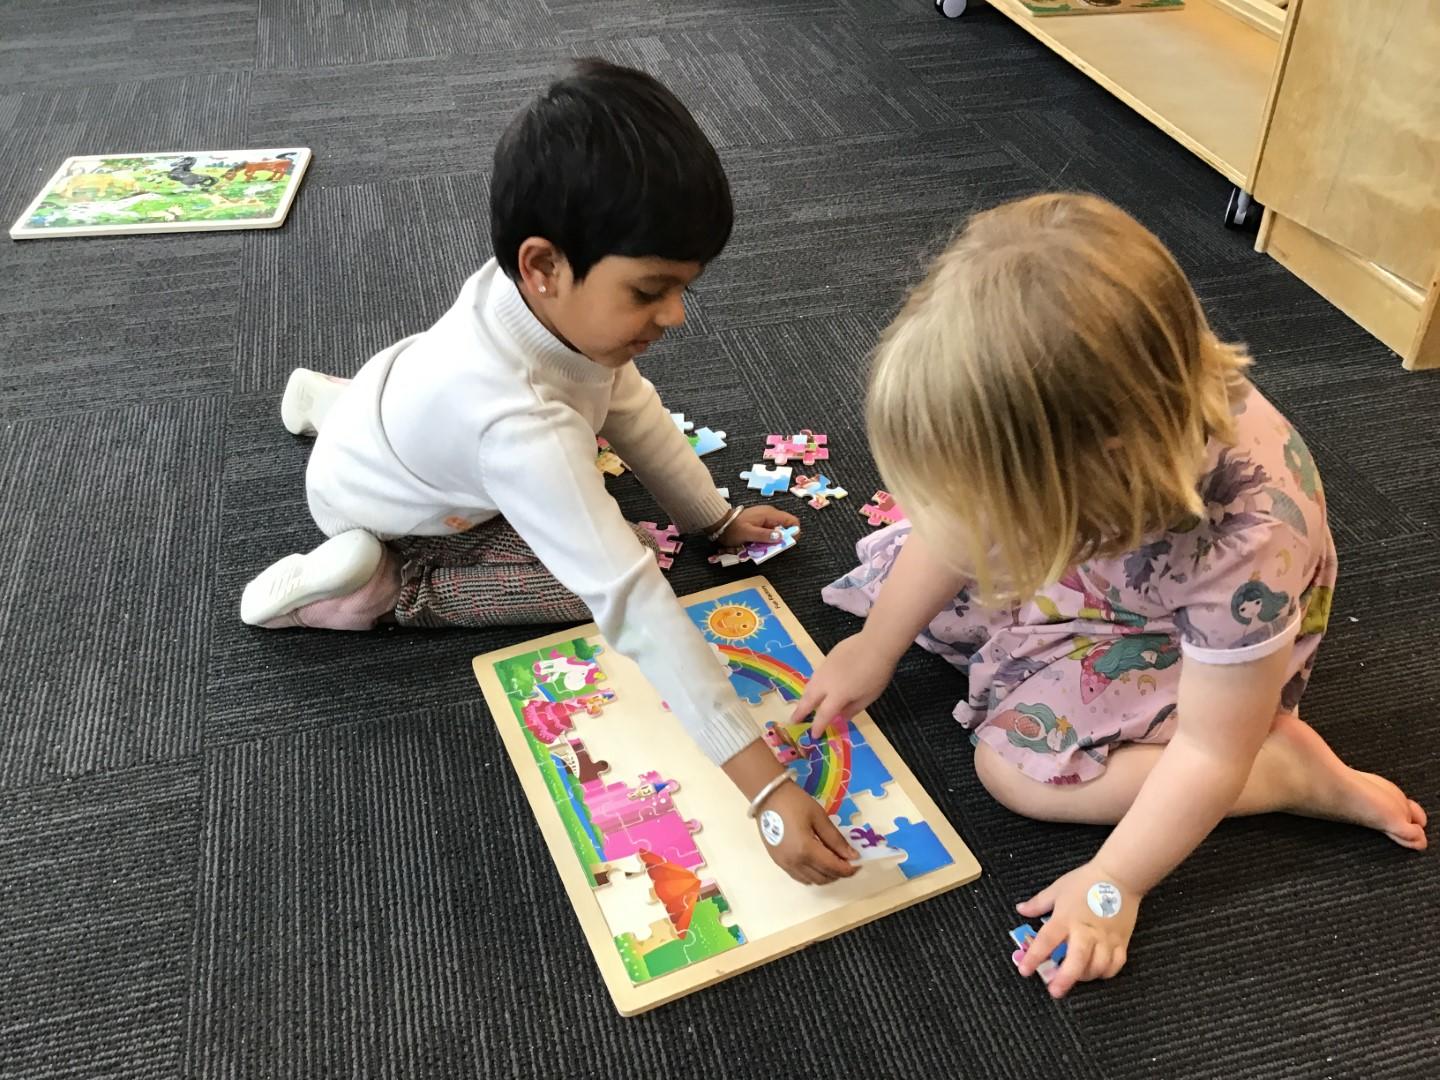 1641770263Working together on a puzzle.JPG